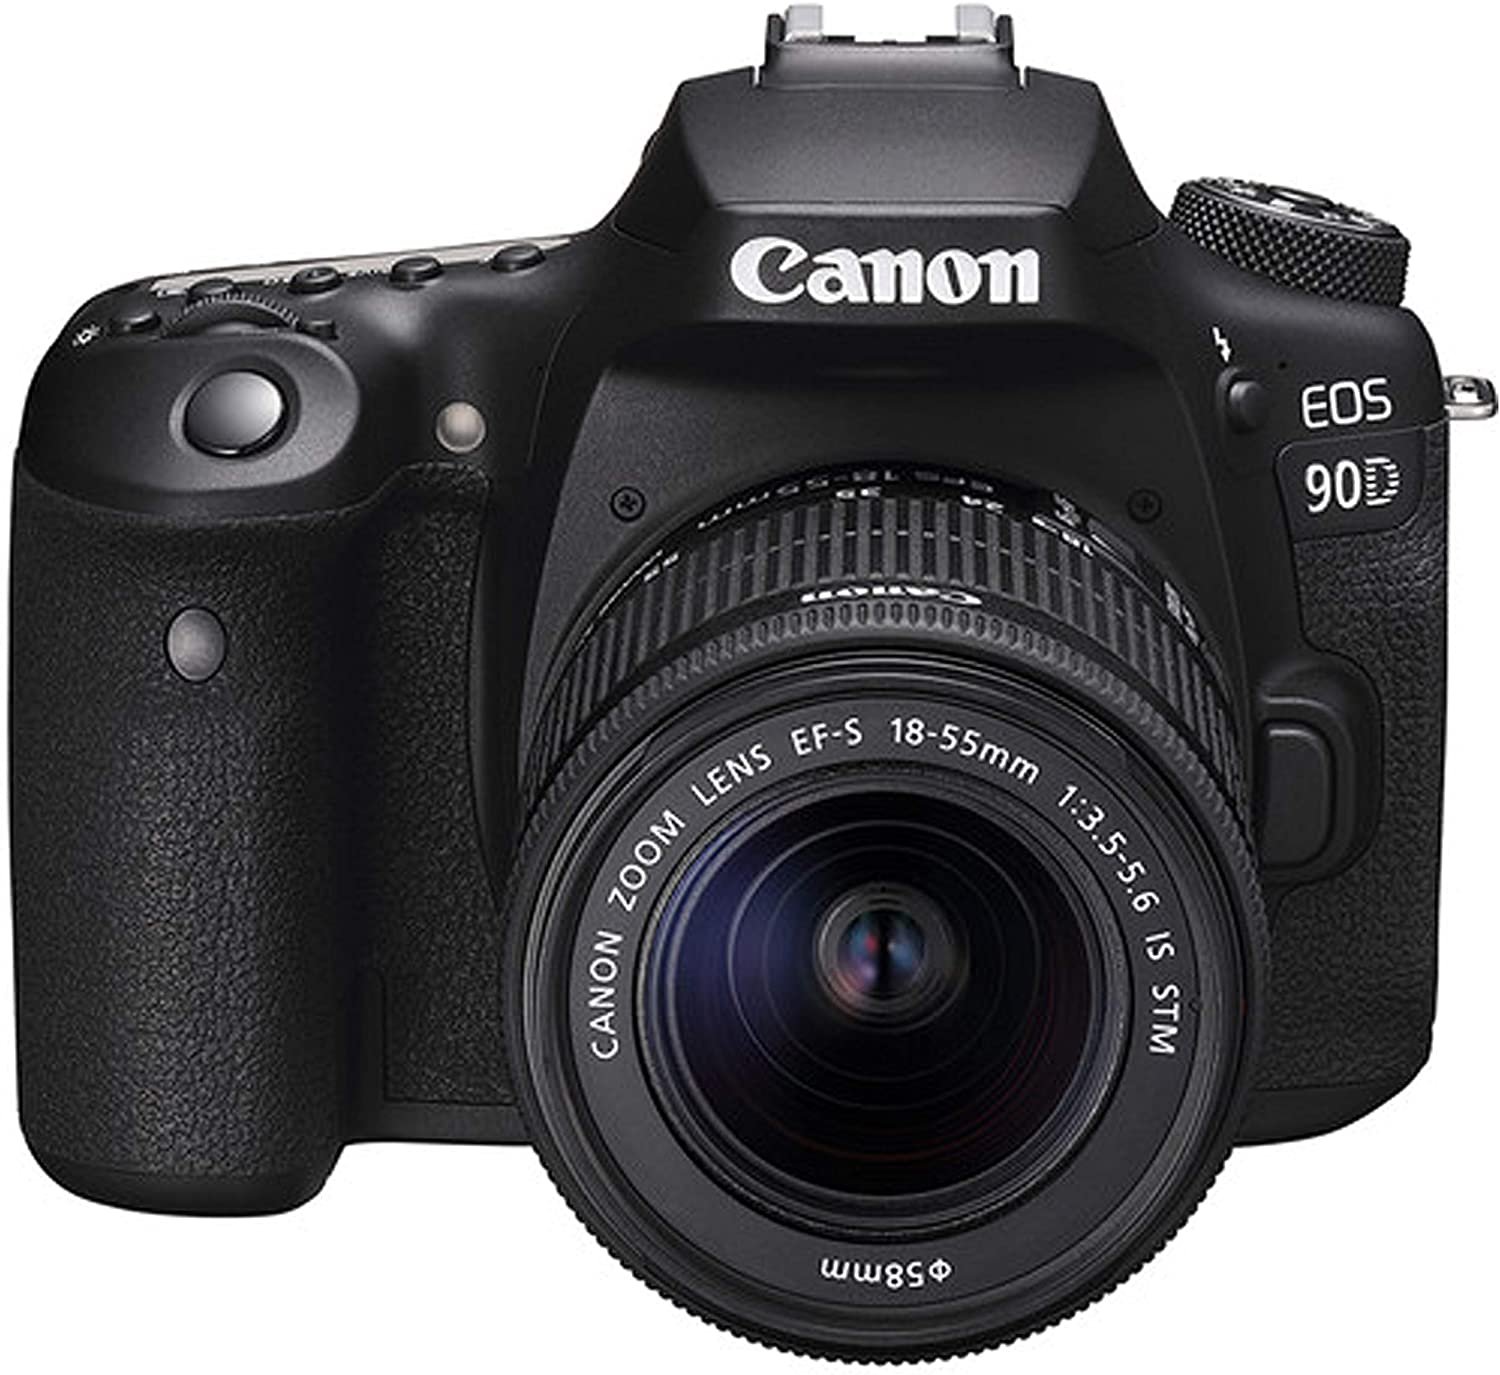 Canon EOS 90D DSLR Camera + 18-55mm f/3.5-5.6 is STM Lens + 75-300mm F/4-5.6 III Lens + 128GB Card, Tripod,Back-Pack,Filters, 2X Telephoto Lens, - image 2 of 8